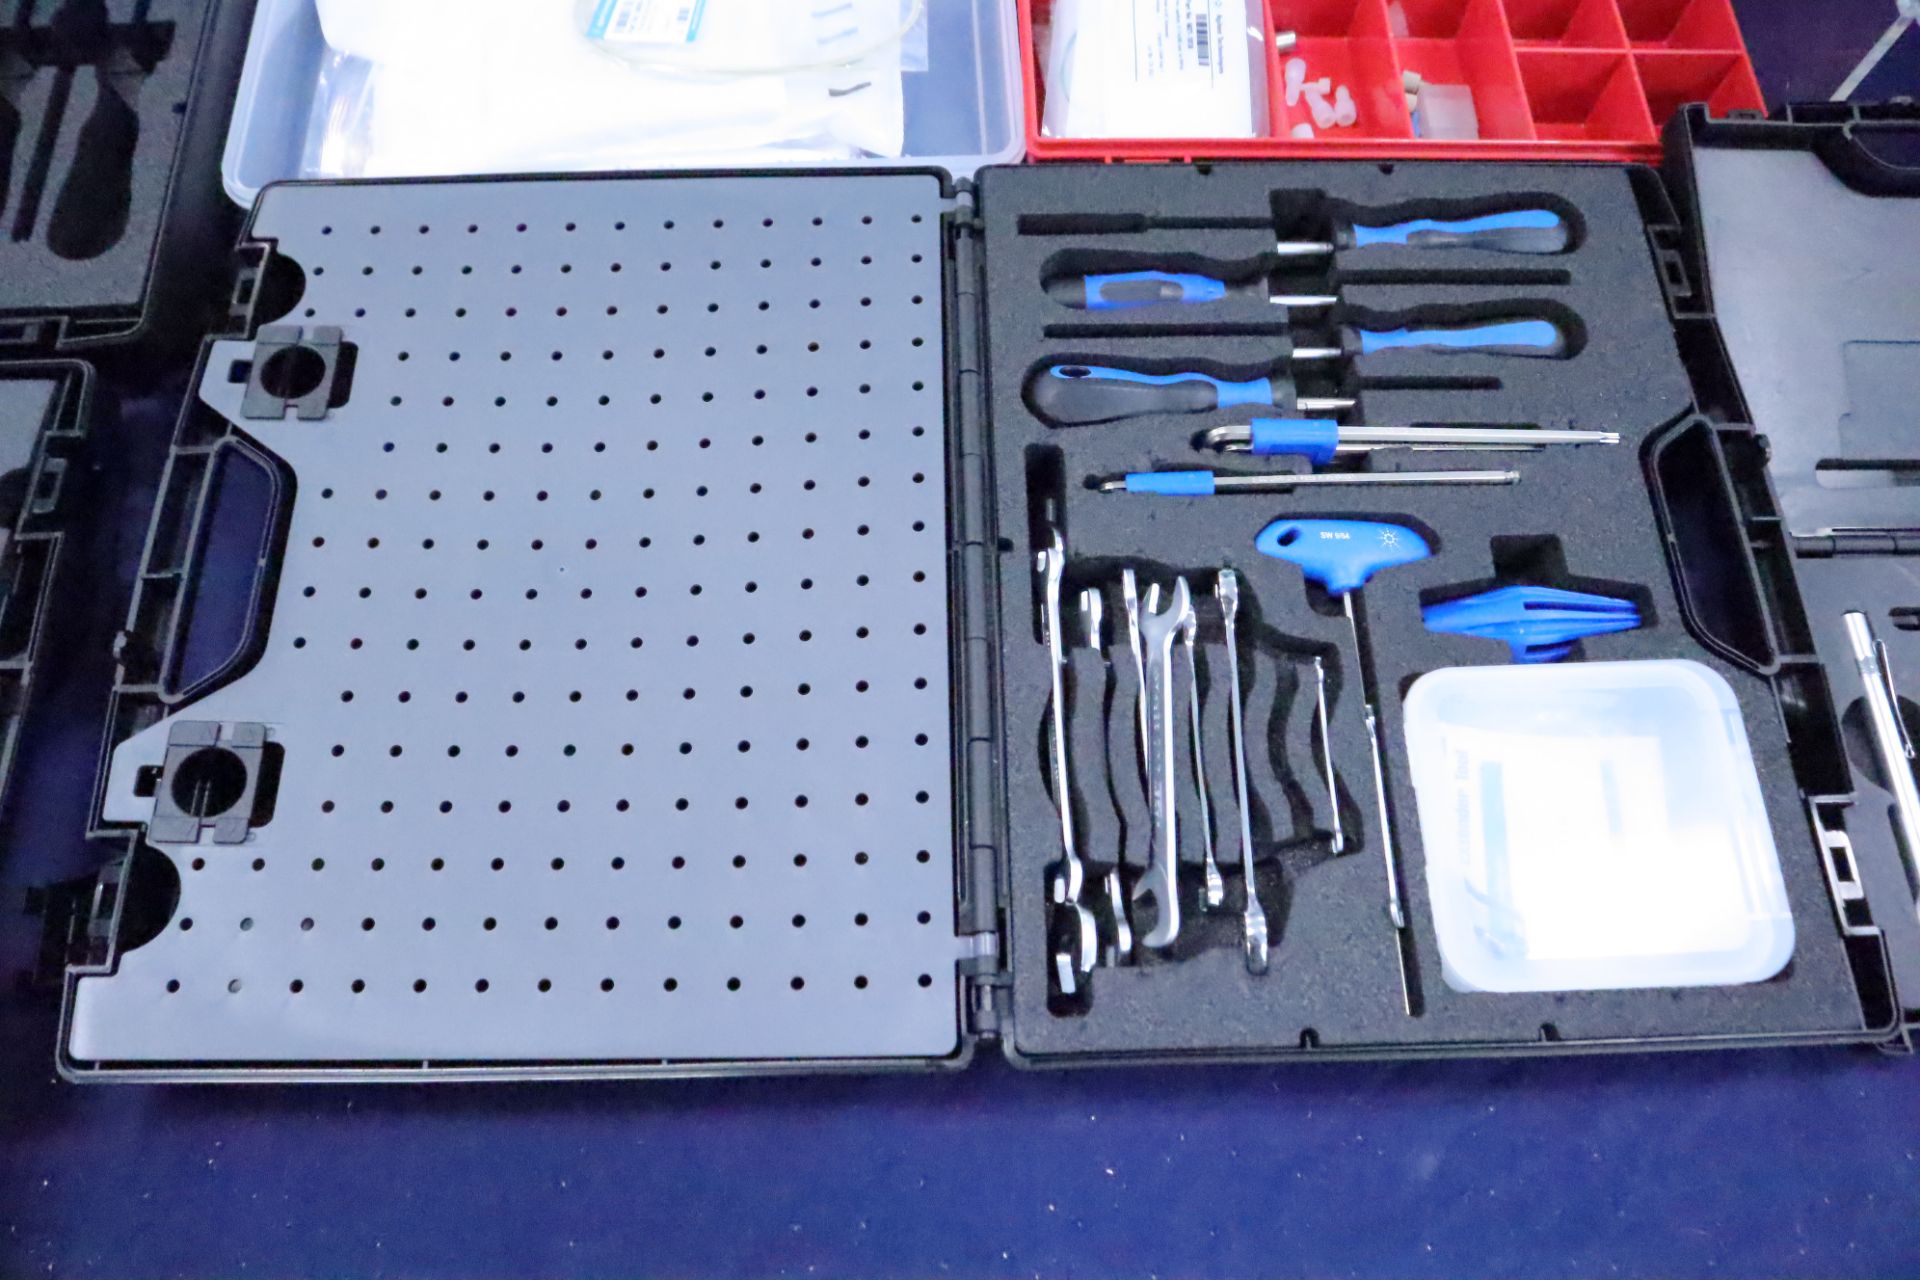 UPDATED PHOTOS Agilent Technologies OEM Replacement Parts and tool kits for LC/MS Machines - Image 3 of 37